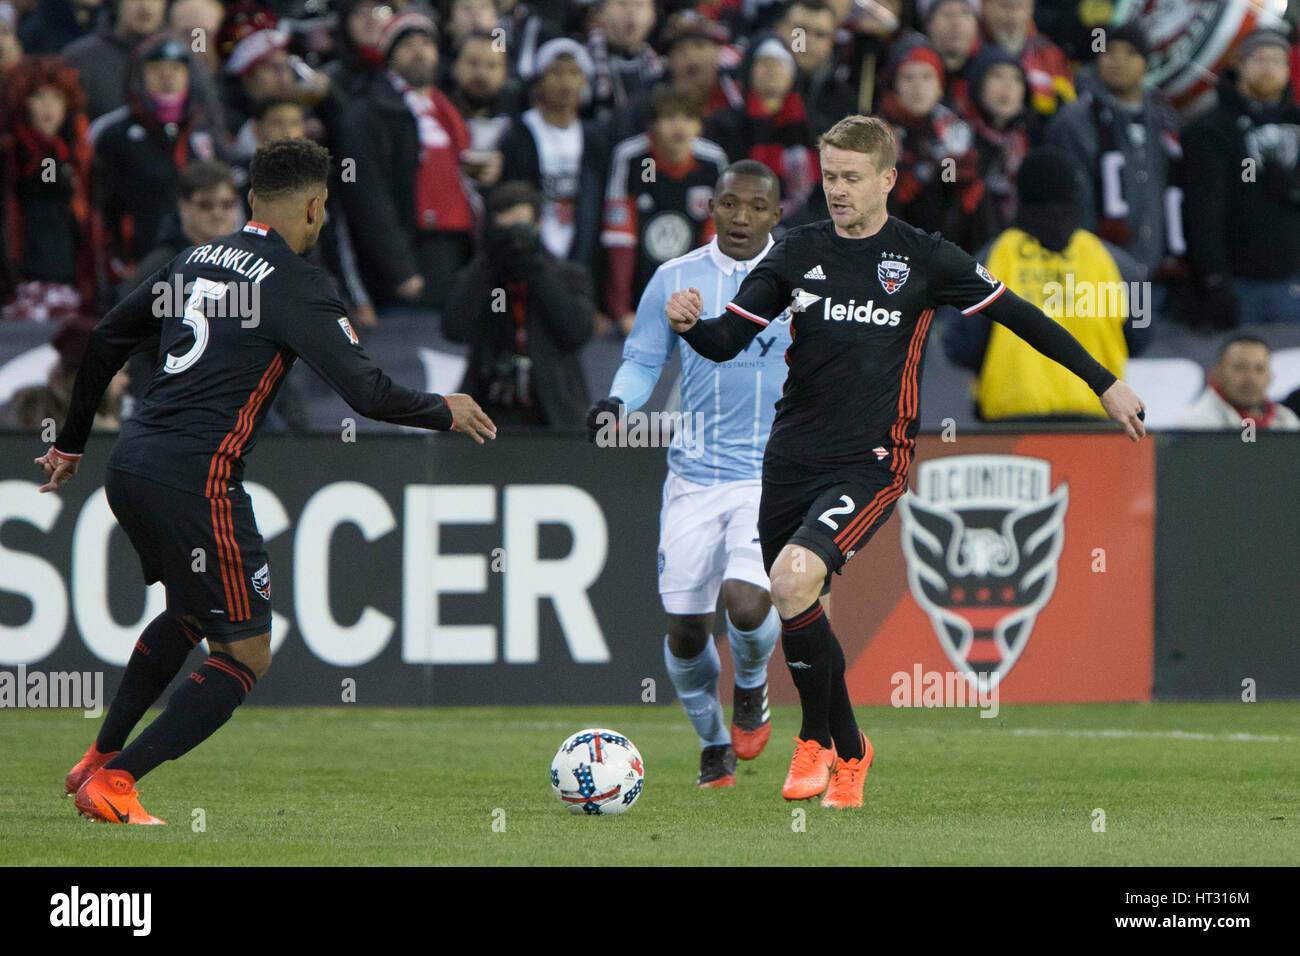 D.C. United defender Taylor Kemp (2) during D.C. United's home opener against Sporting Kansas City which finished 0-0 at RFK Stadium in Washington, D.C. on Saturday March 4, 2017. Stock Photo